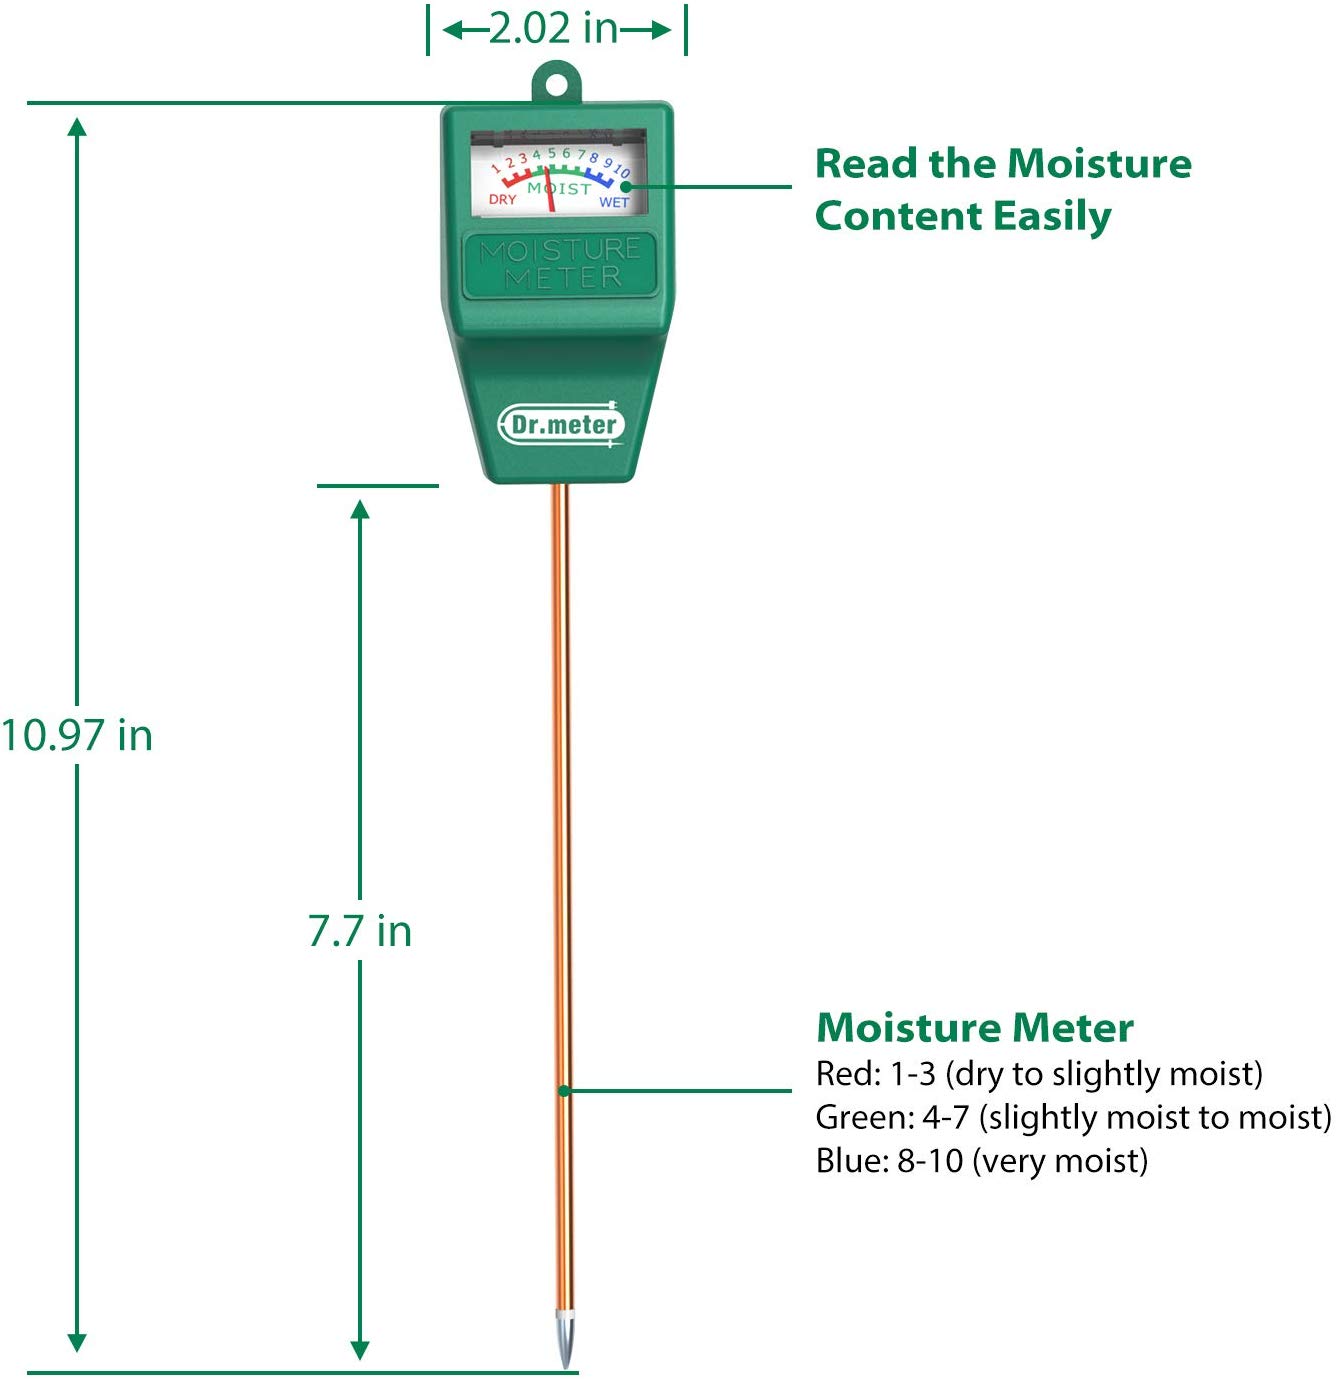 How to Use a Moisture Meter for Your Plants